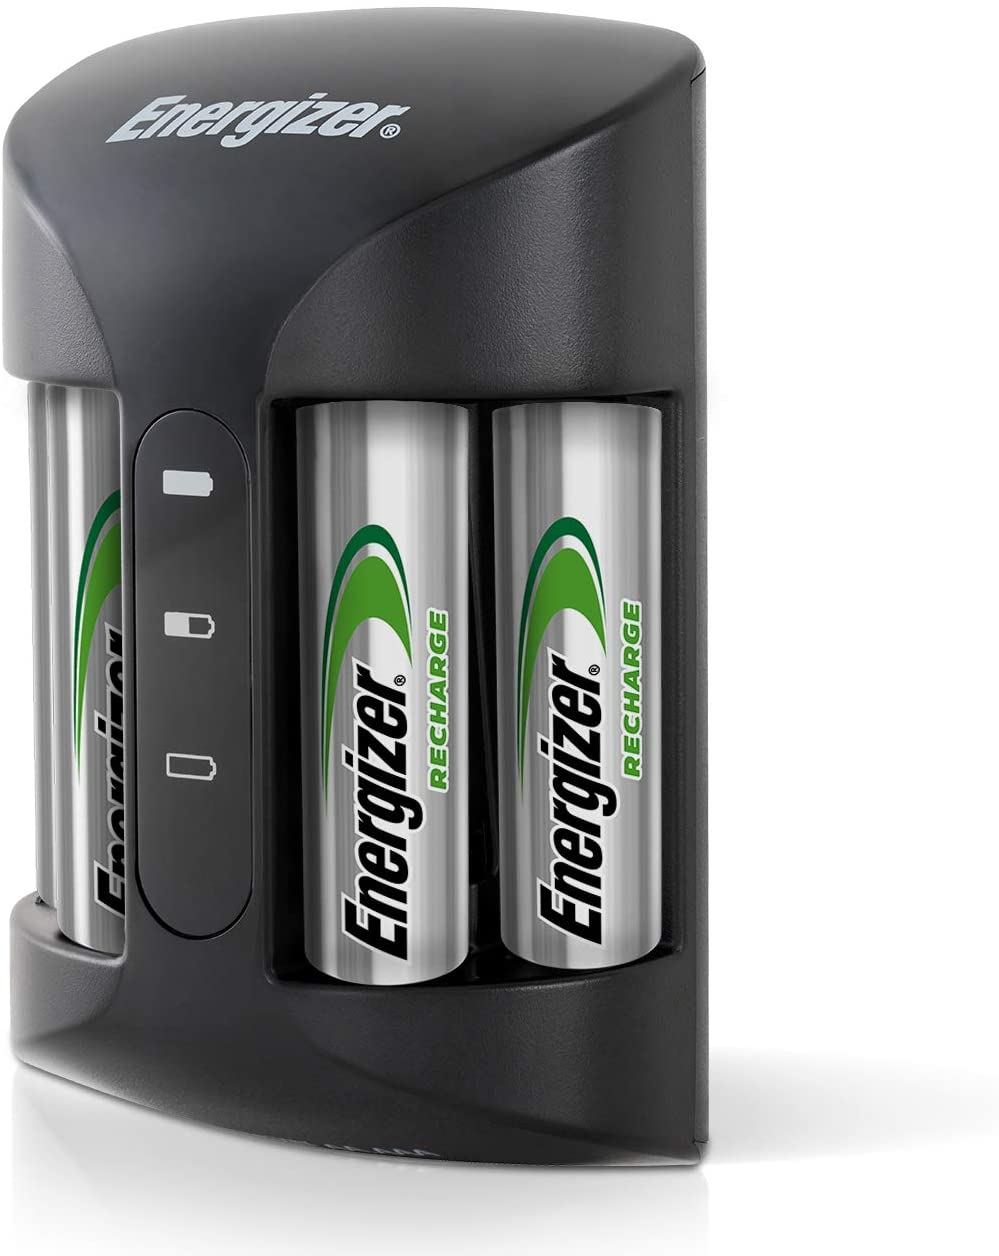 Energizer Rechargeable AA Battery Charger with 4 AA NiMH Rechargeable Batteries,